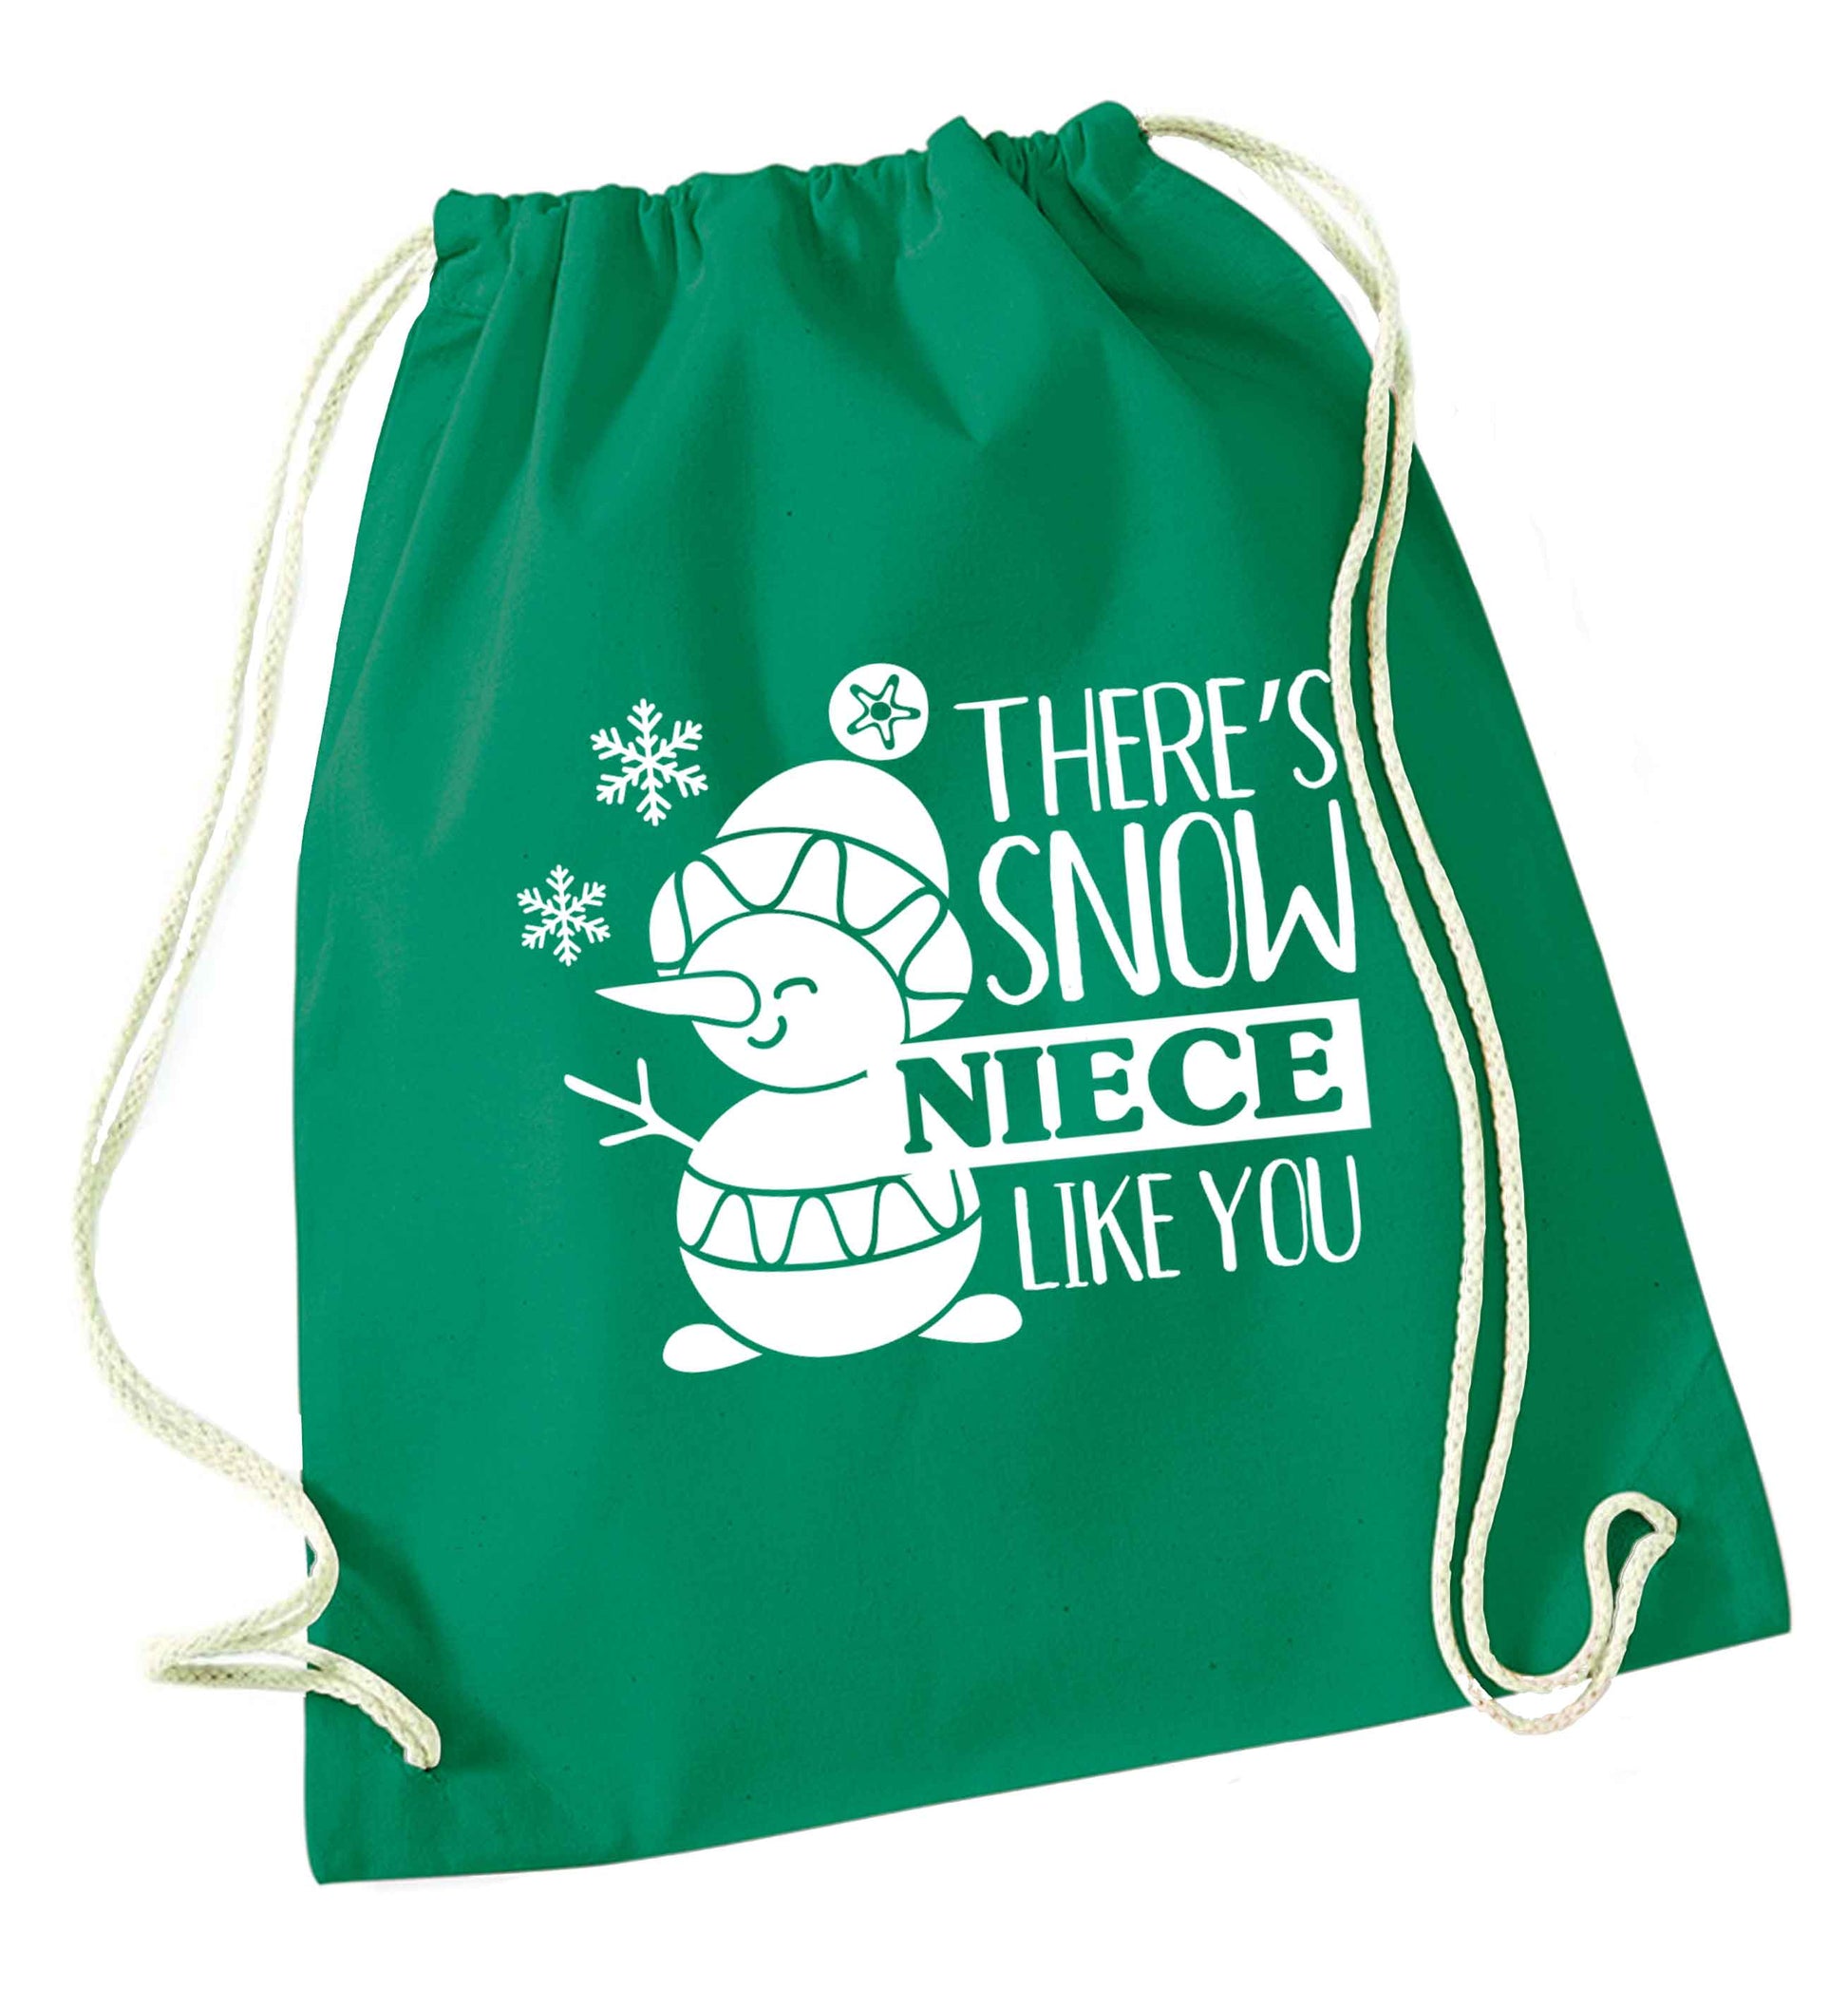 There's snow niece like you green drawstring bag